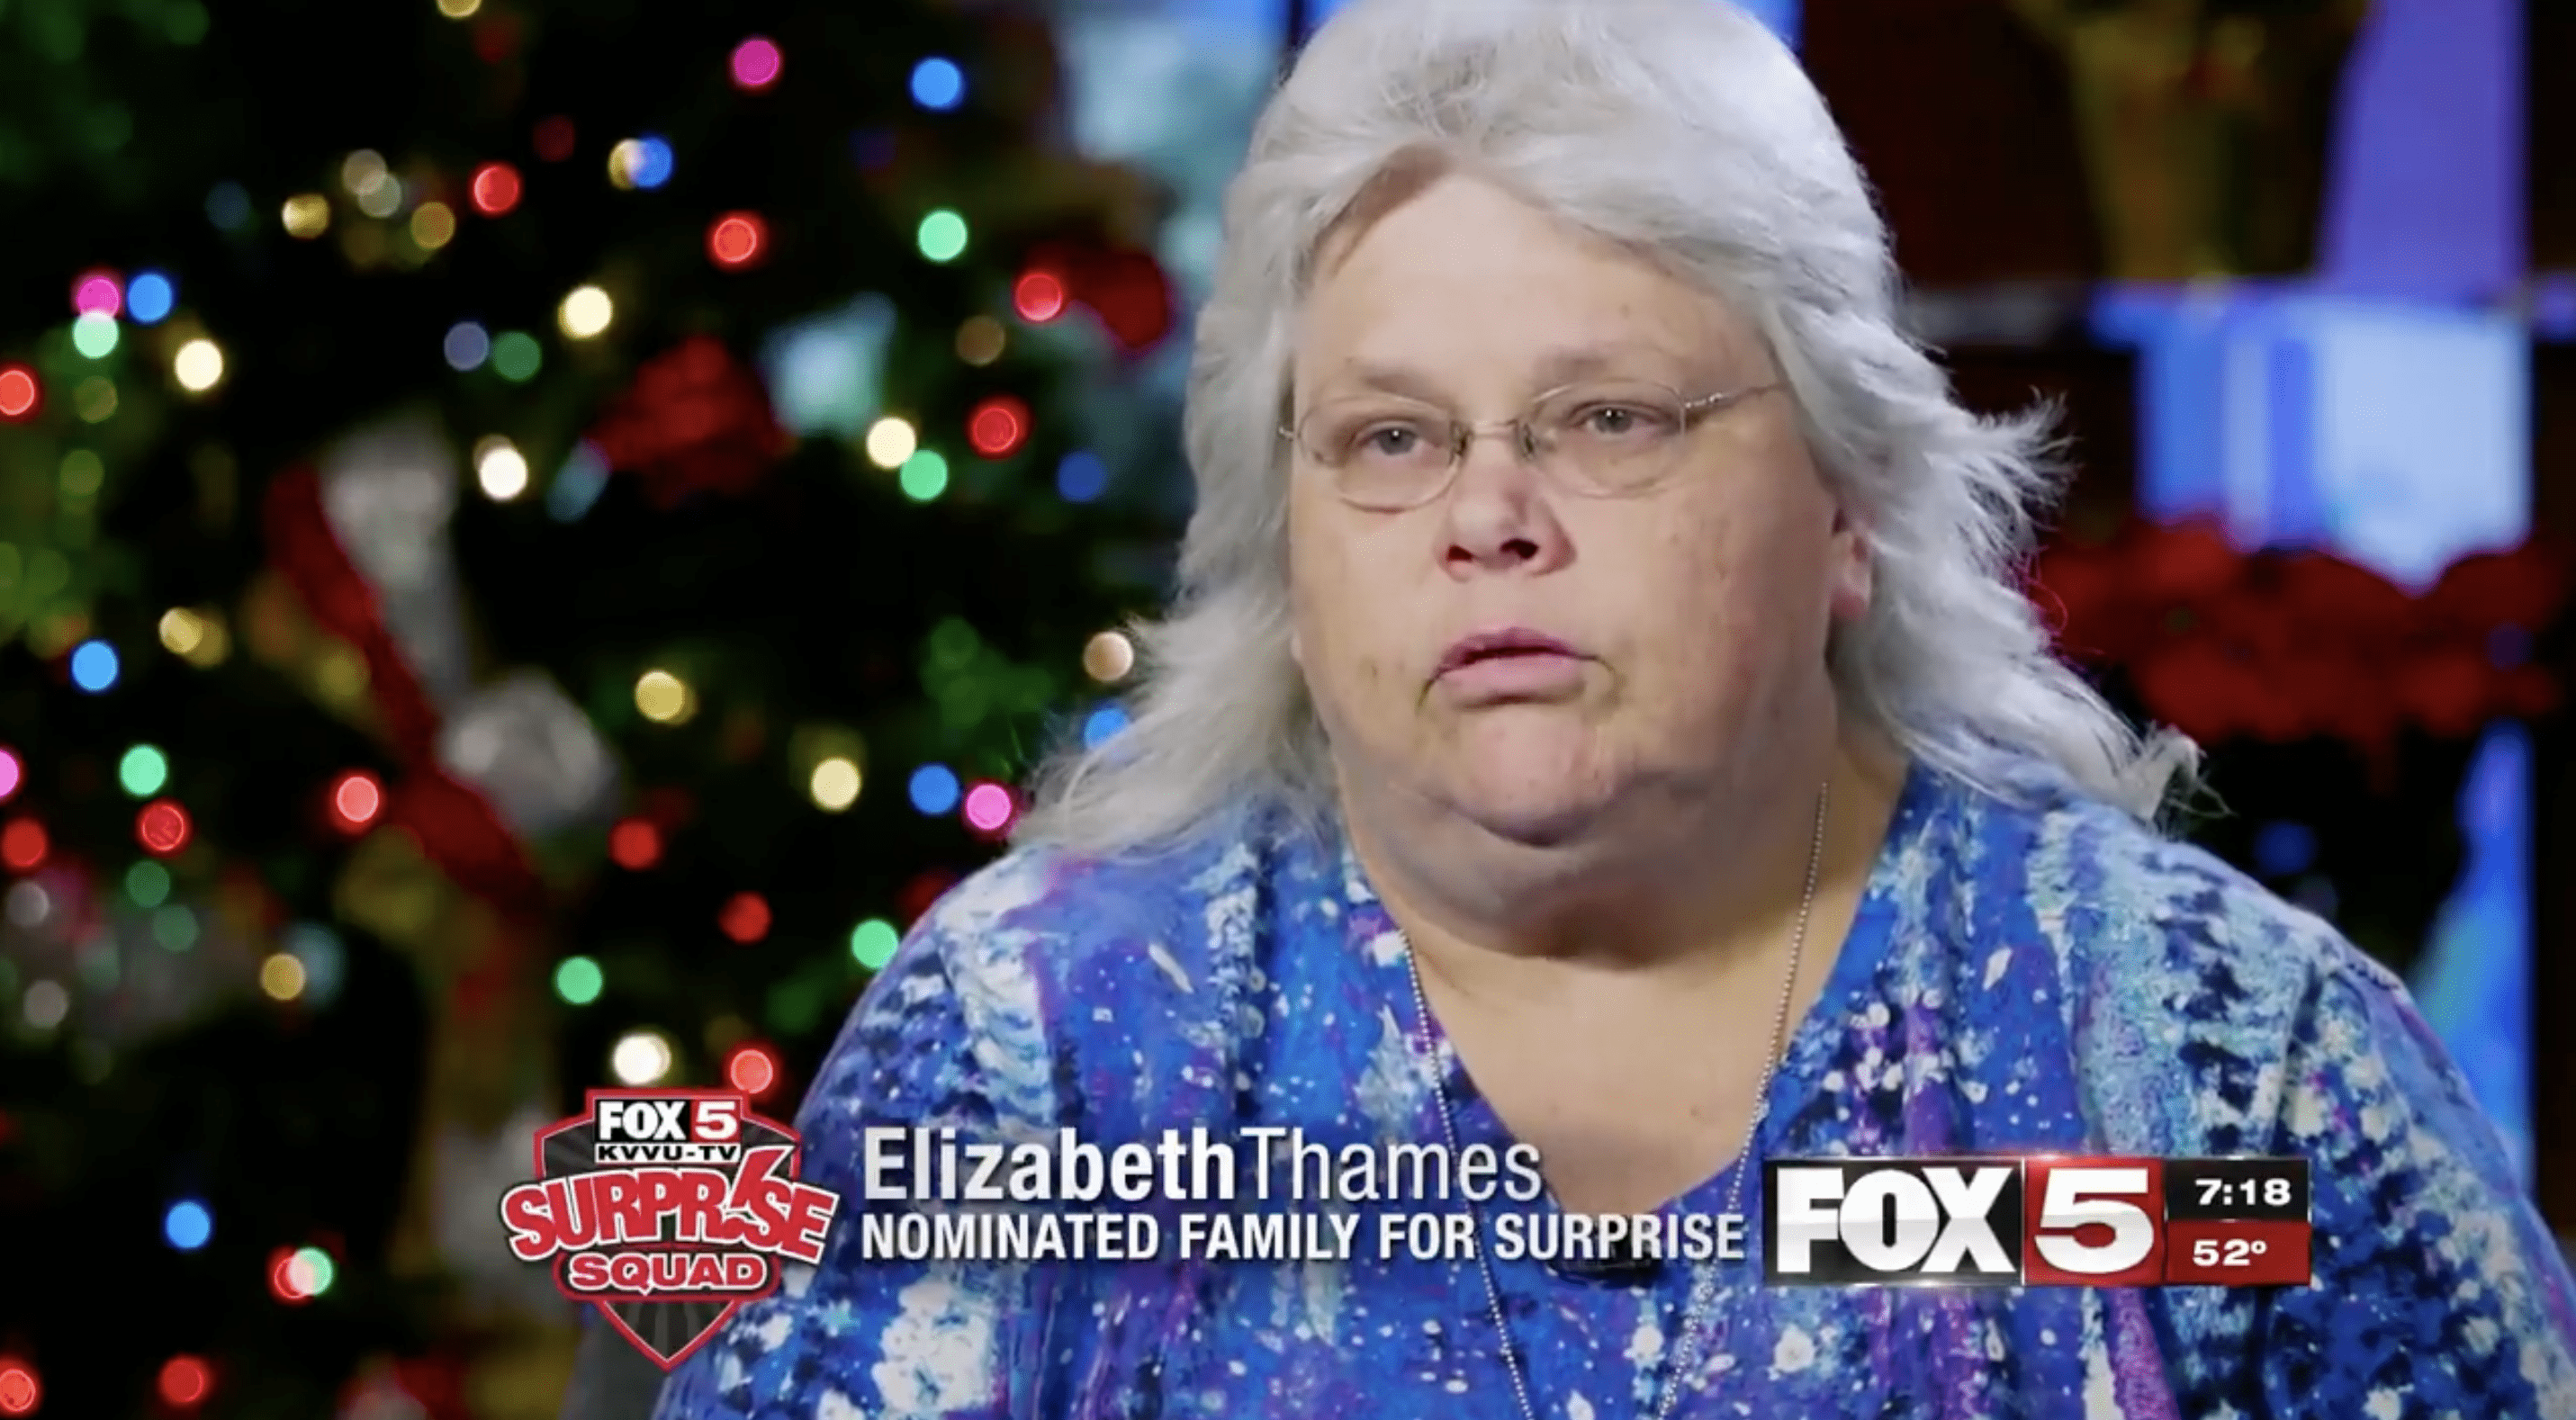 Elizabeth Thames, the neighbor who nominated the Beauchmin family for the Fox5 Surprise Squad. | Photo: facebook.com/BakersfieldFamilyLaw